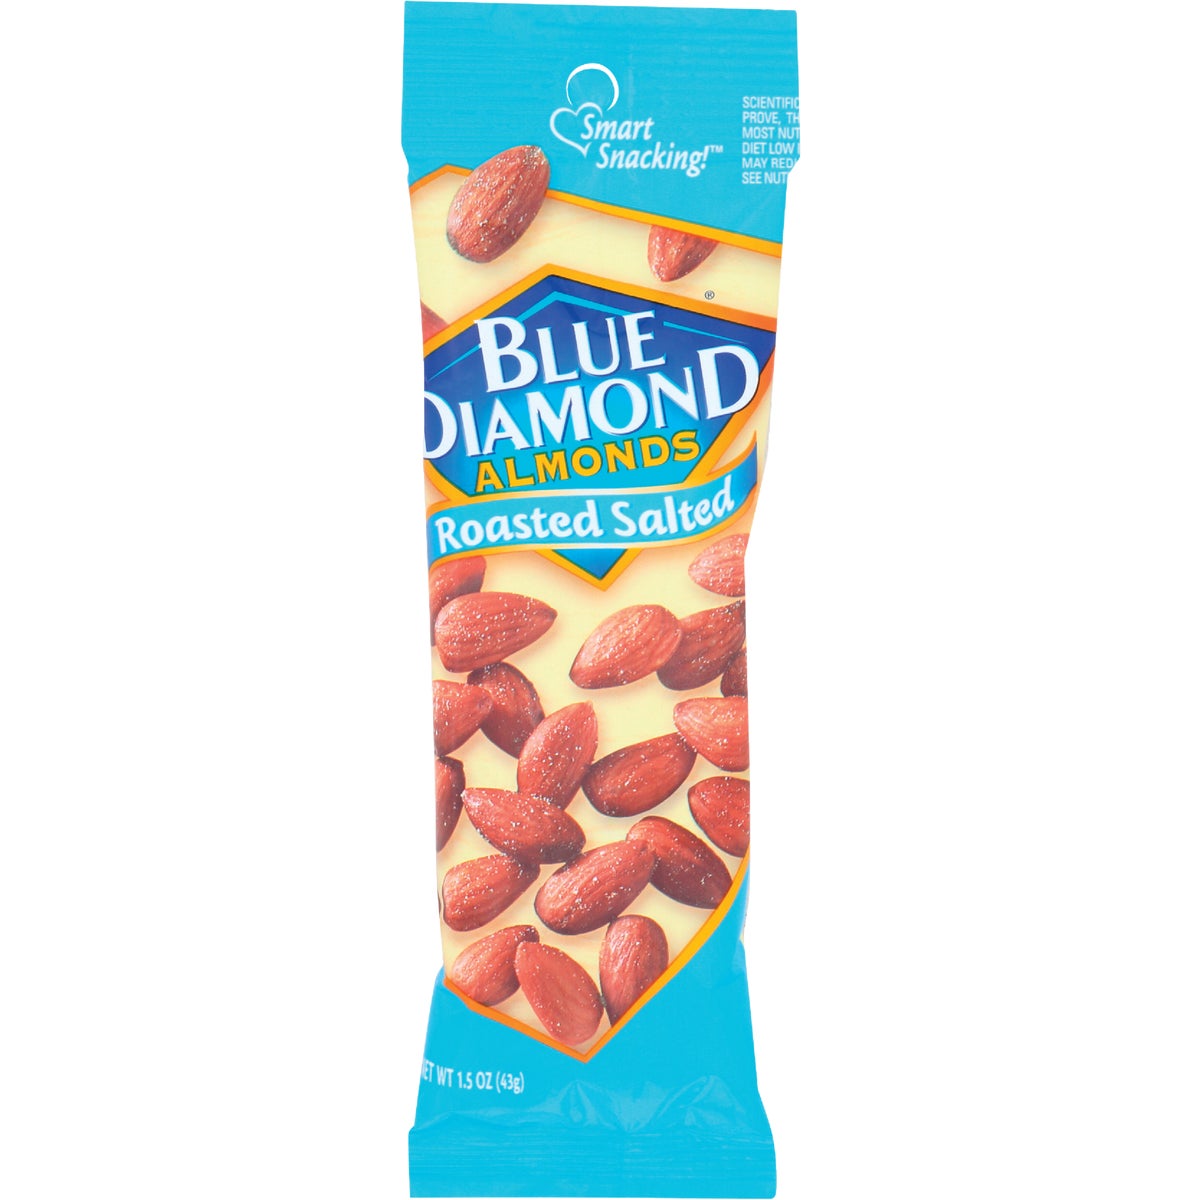 Item 970341, Delicious almonds with just the right seasoning to compliment the almond's 